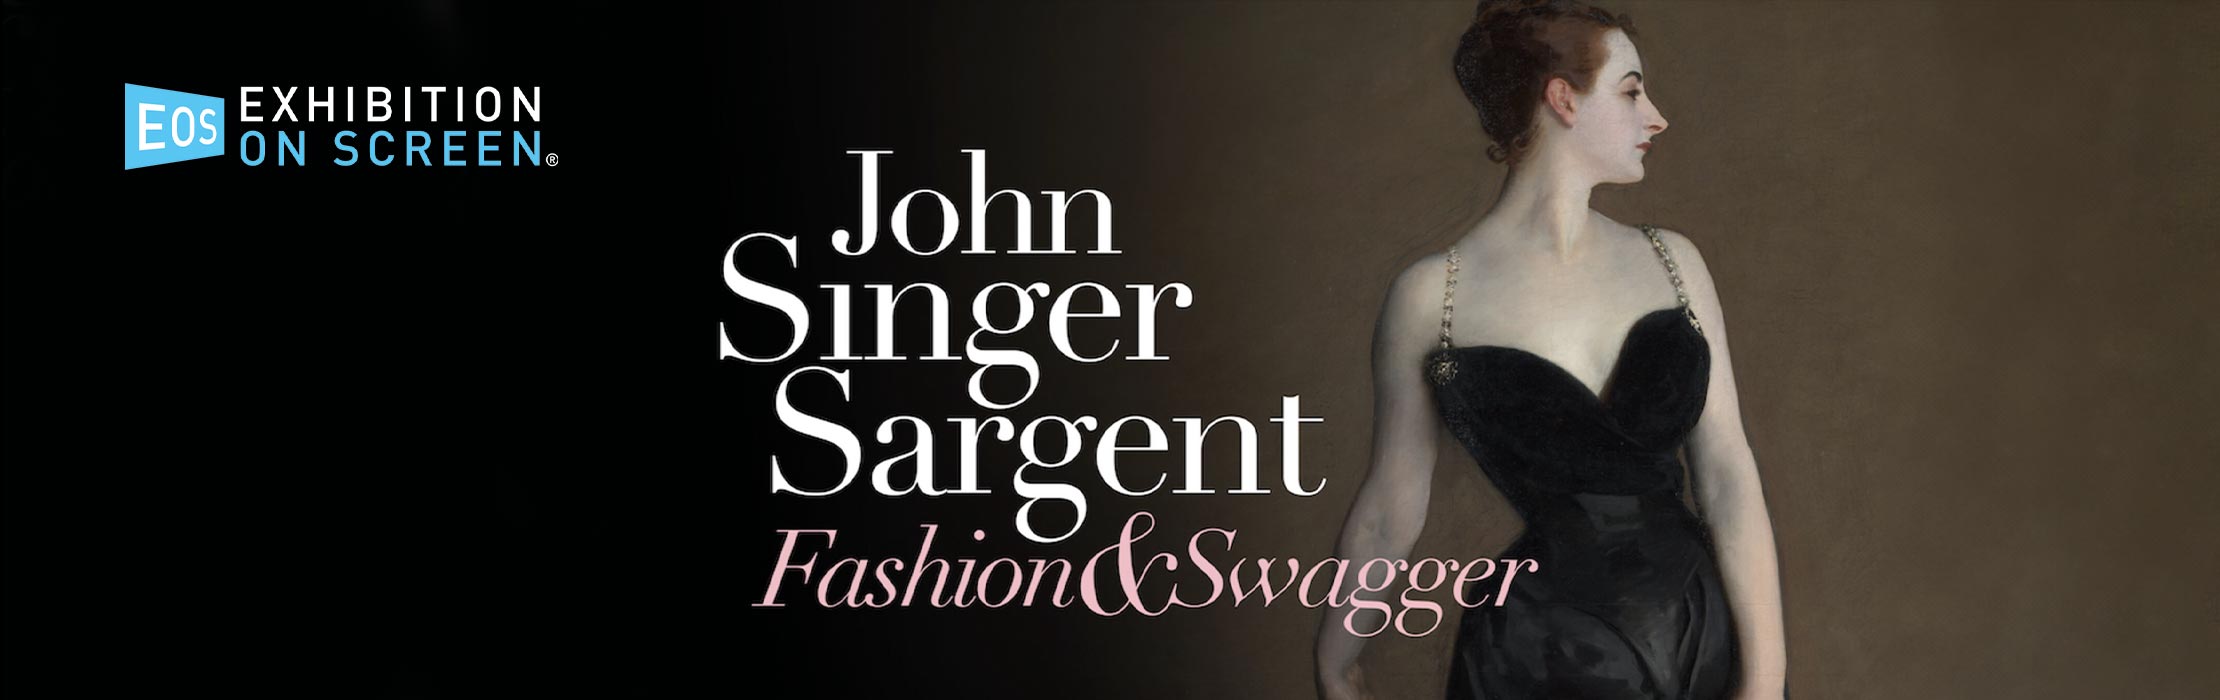 /film/EOS-John-Singer-Sargent-Fashion-and-Swagger